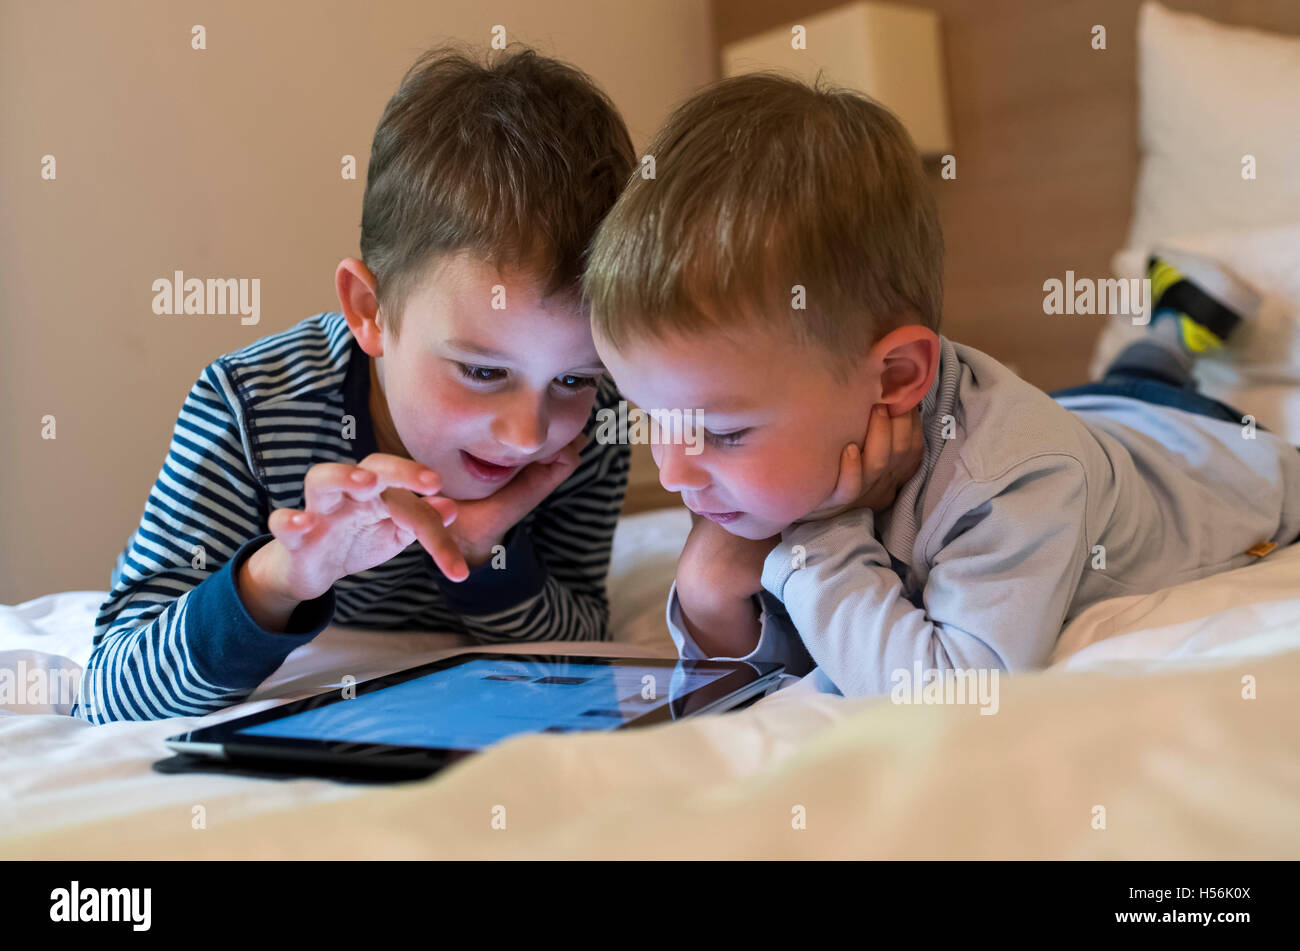 Two boys, siblings lying on a bed and playing with an iPad, Tablet PC Stock Photo